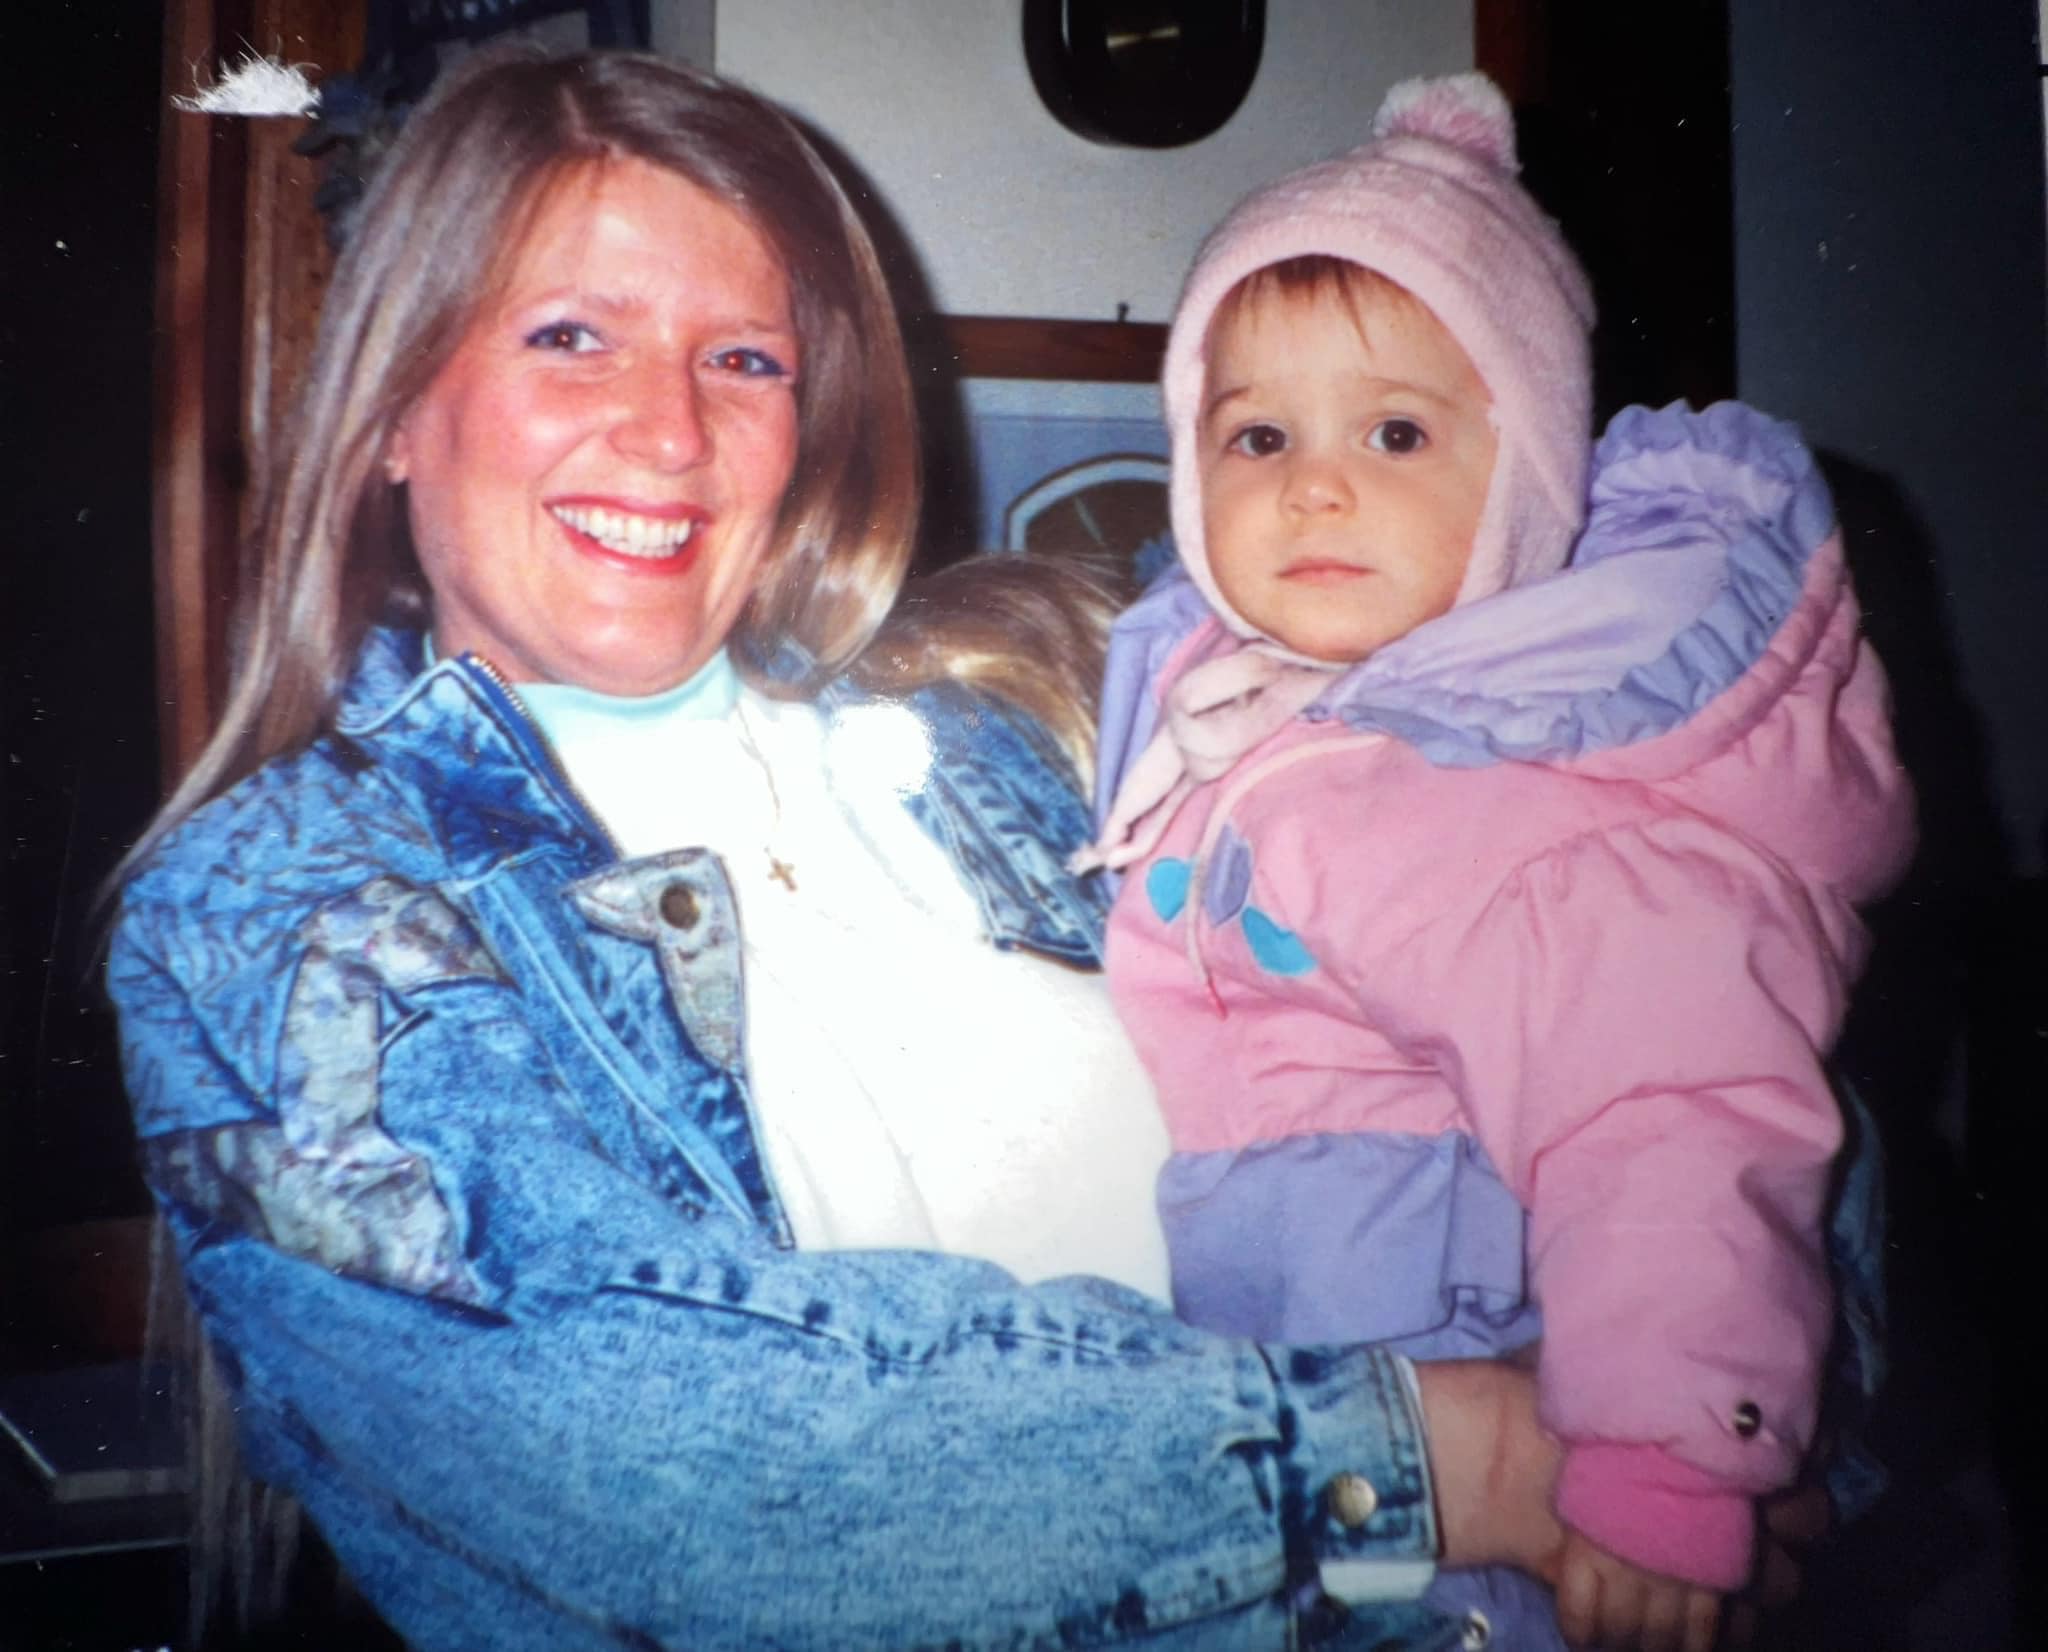 The post features Lizzy in a pink and lilac snowsuit being held by her mother